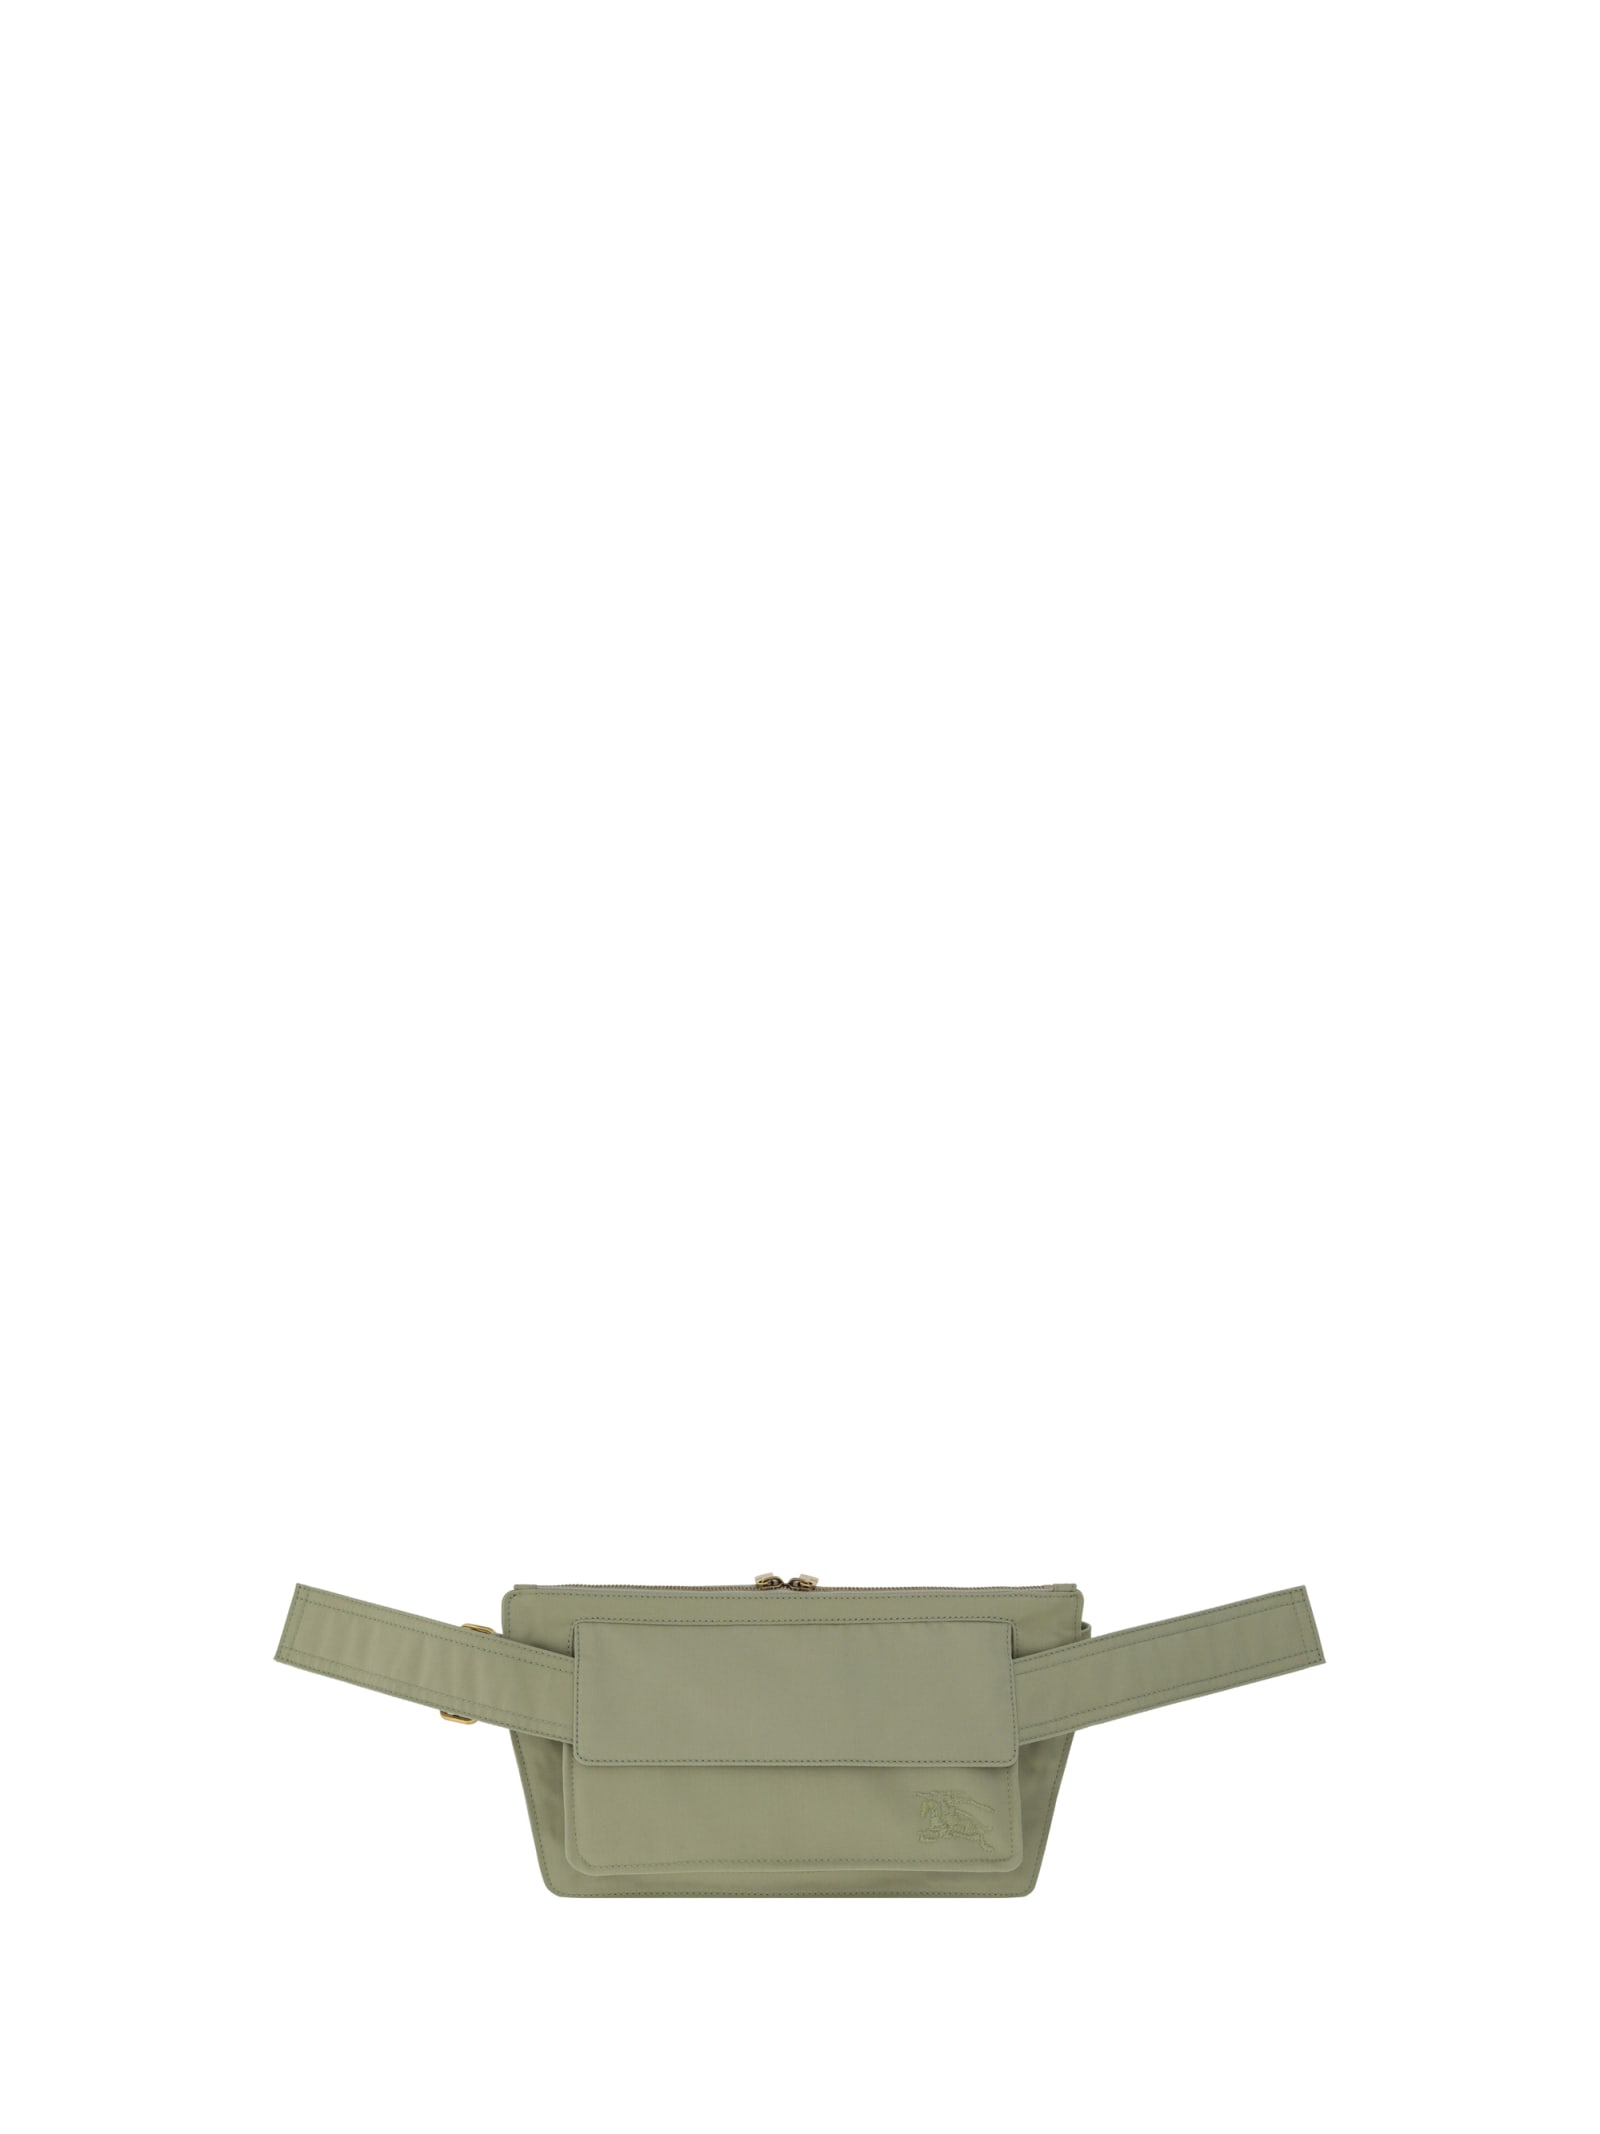 Burberry Trench Fanny Pack